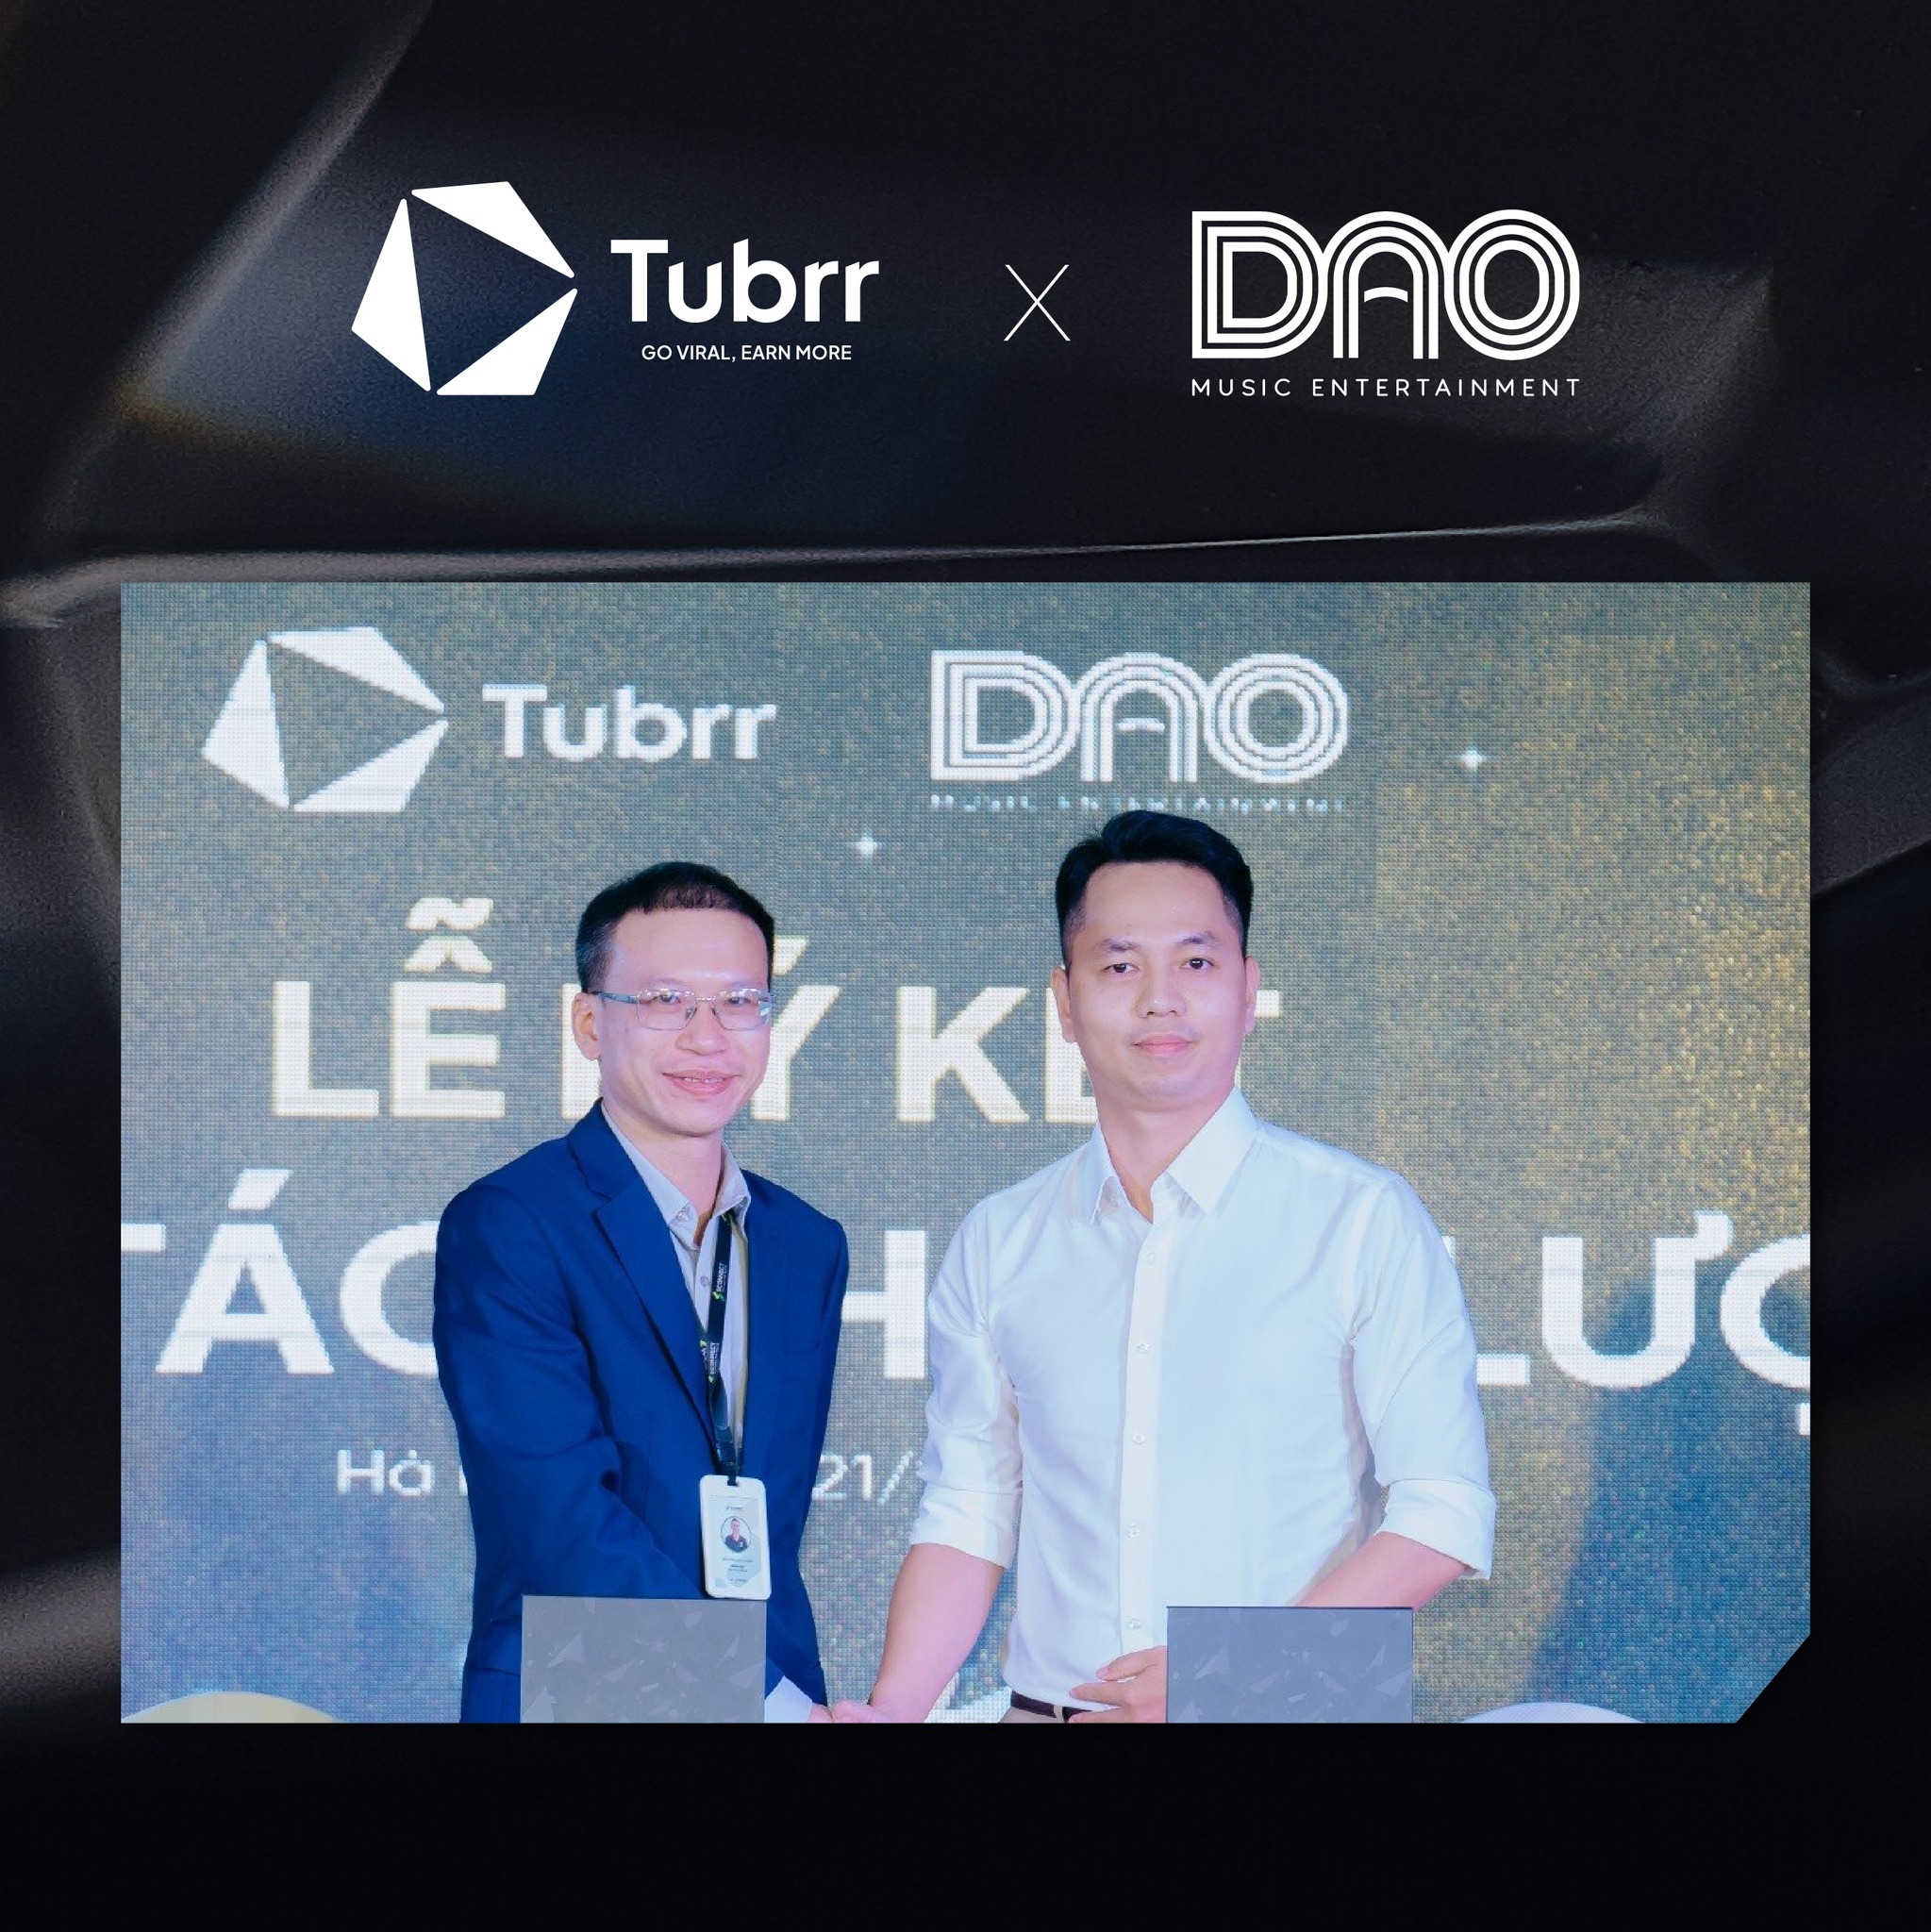 TUBRR collaborates with DAO Music Entertainment